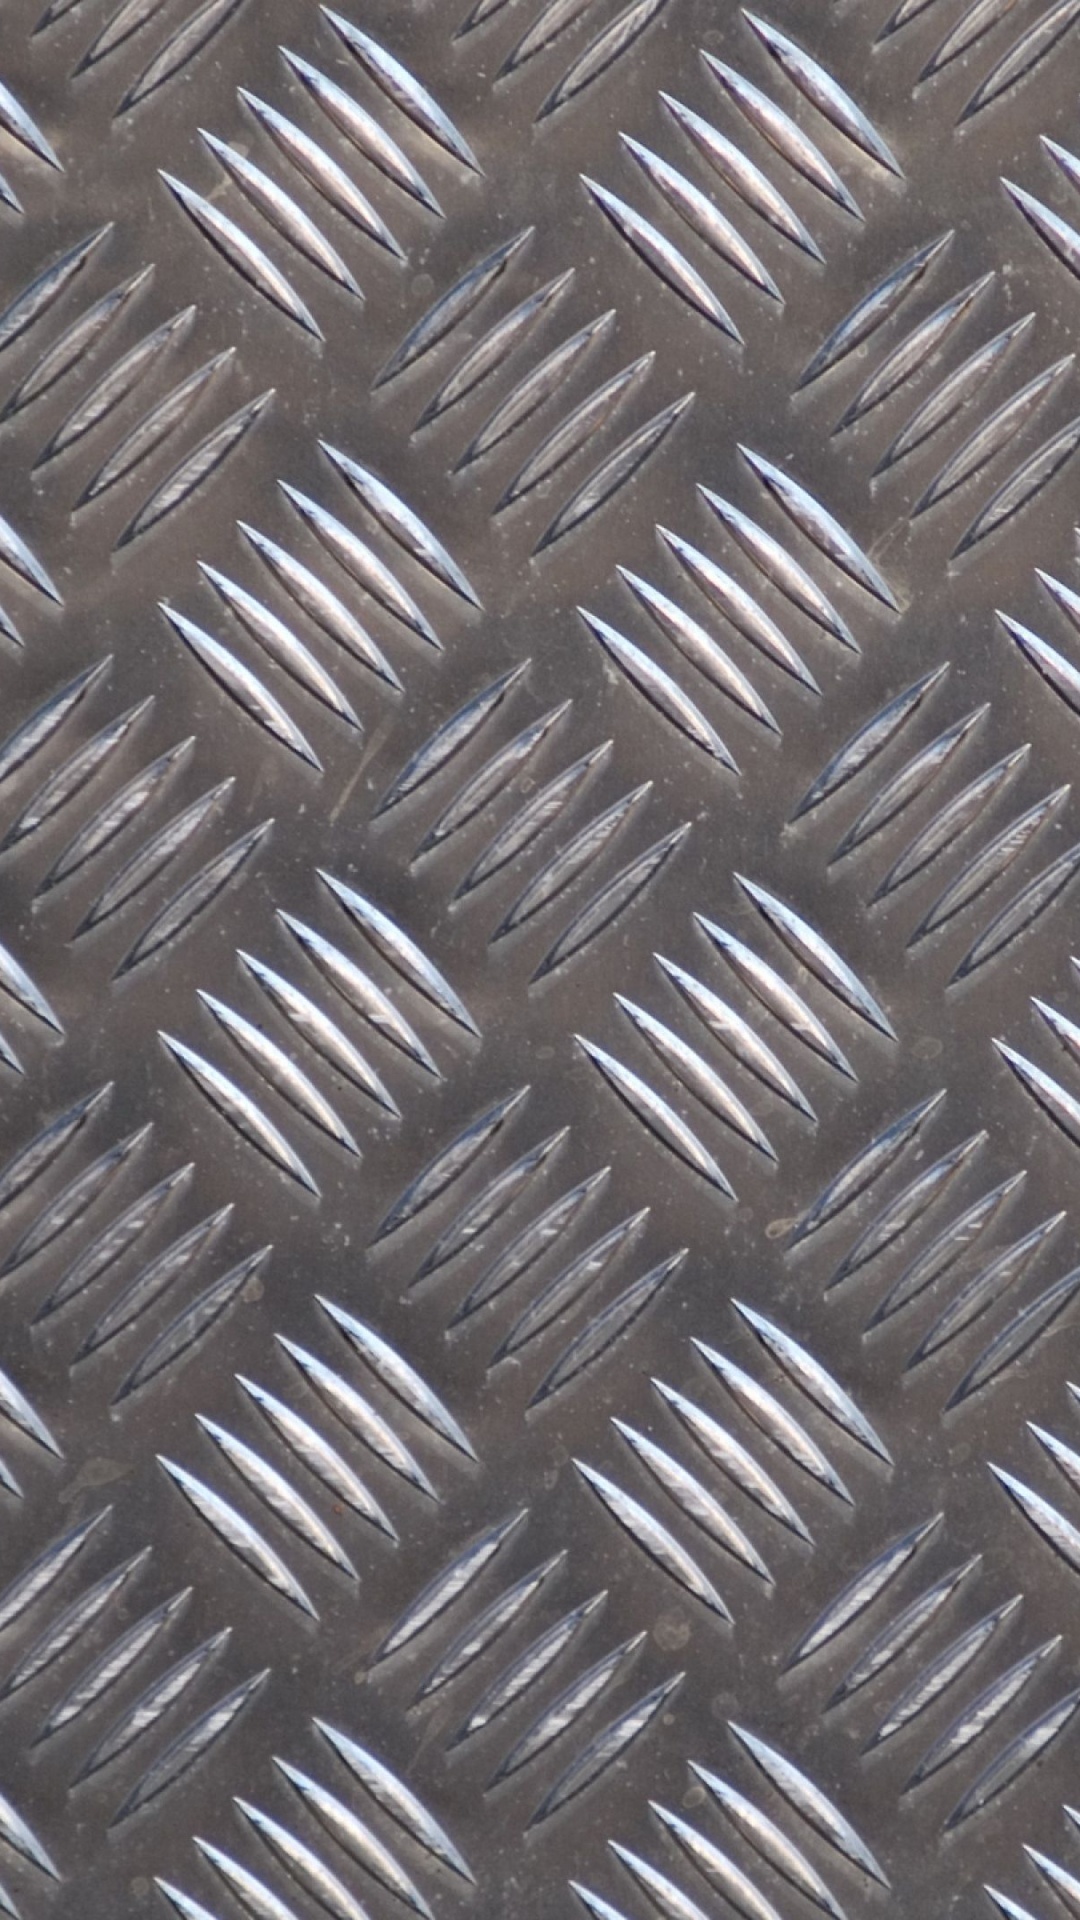 Brown Woven Textile on Brown Wooden Floor. Wallpaper in 1080x1920 Resolution